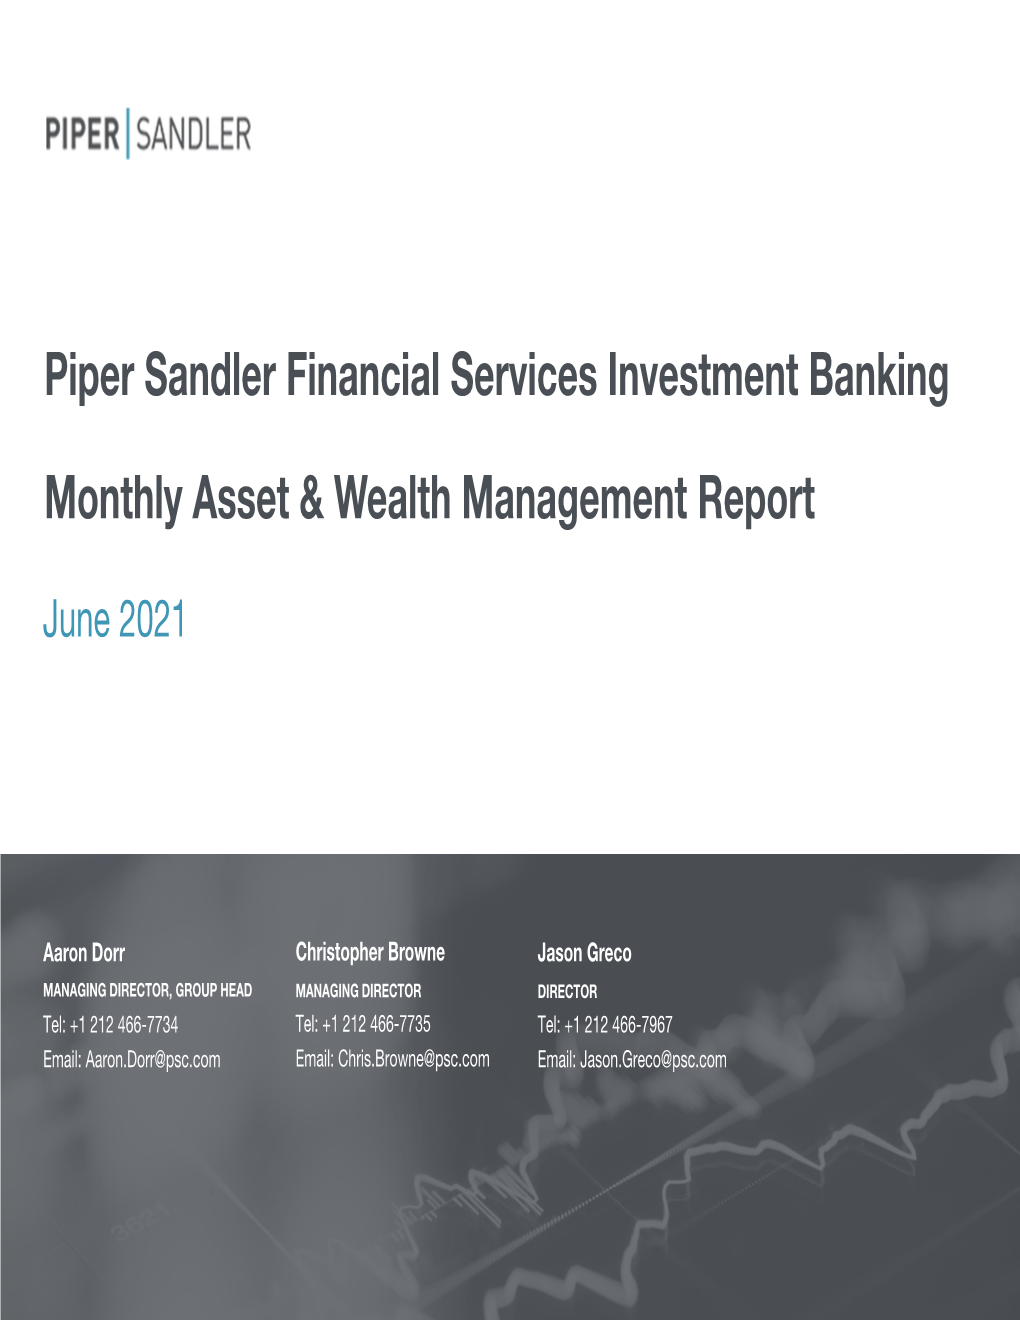 Monthly Asset Management Report